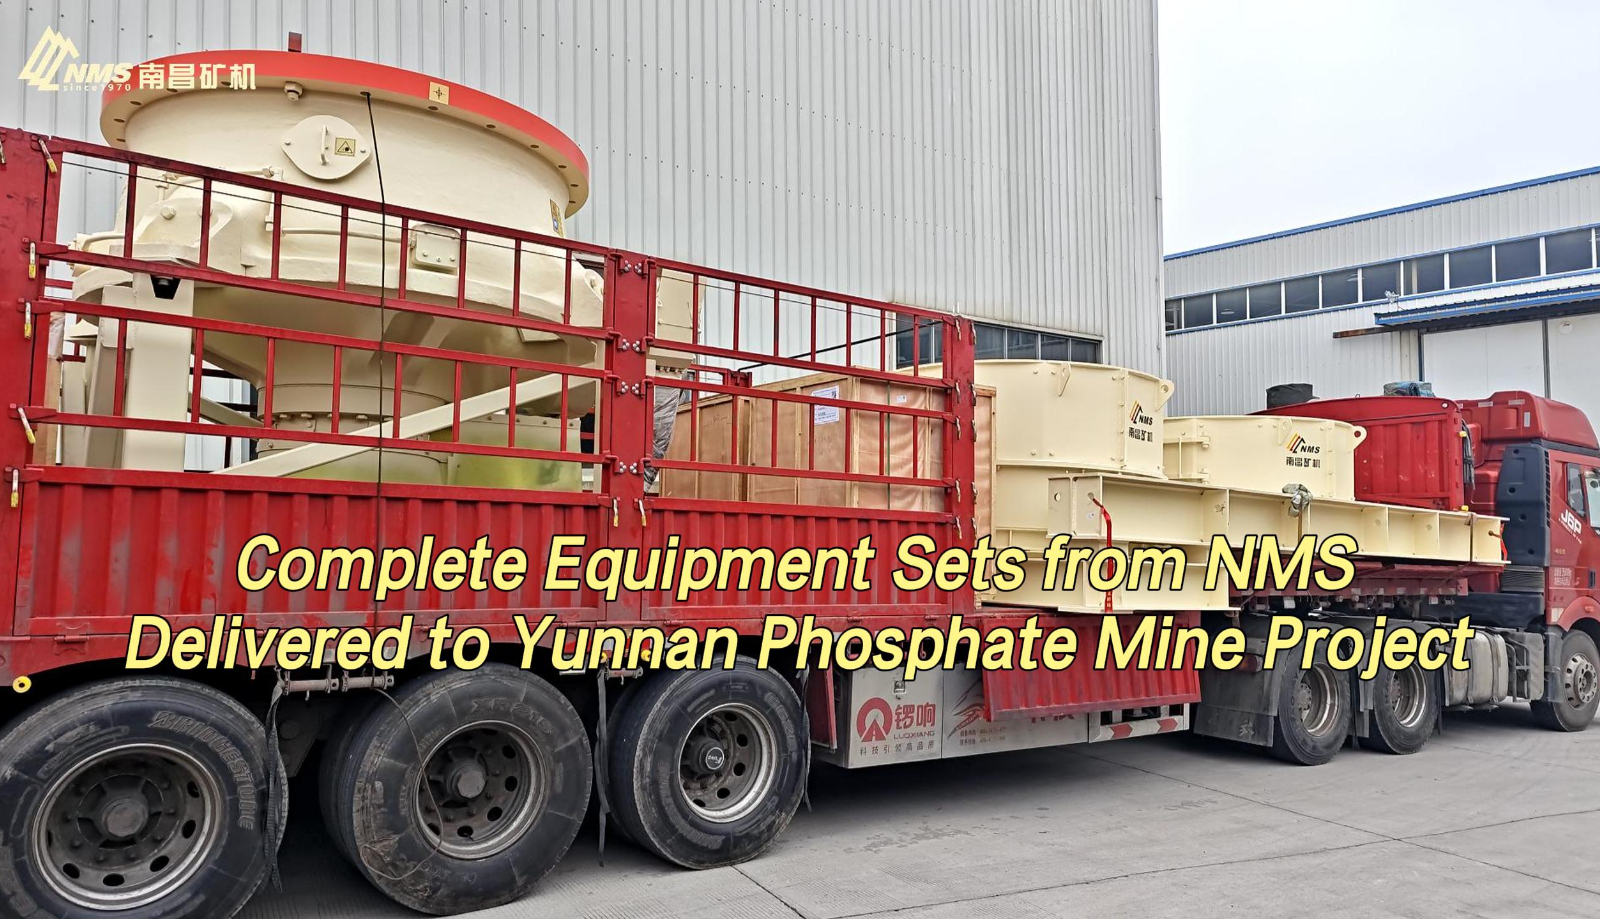 Complete Equipment Sets from NMS Delivered to Yunnan Phosphate Mine Project